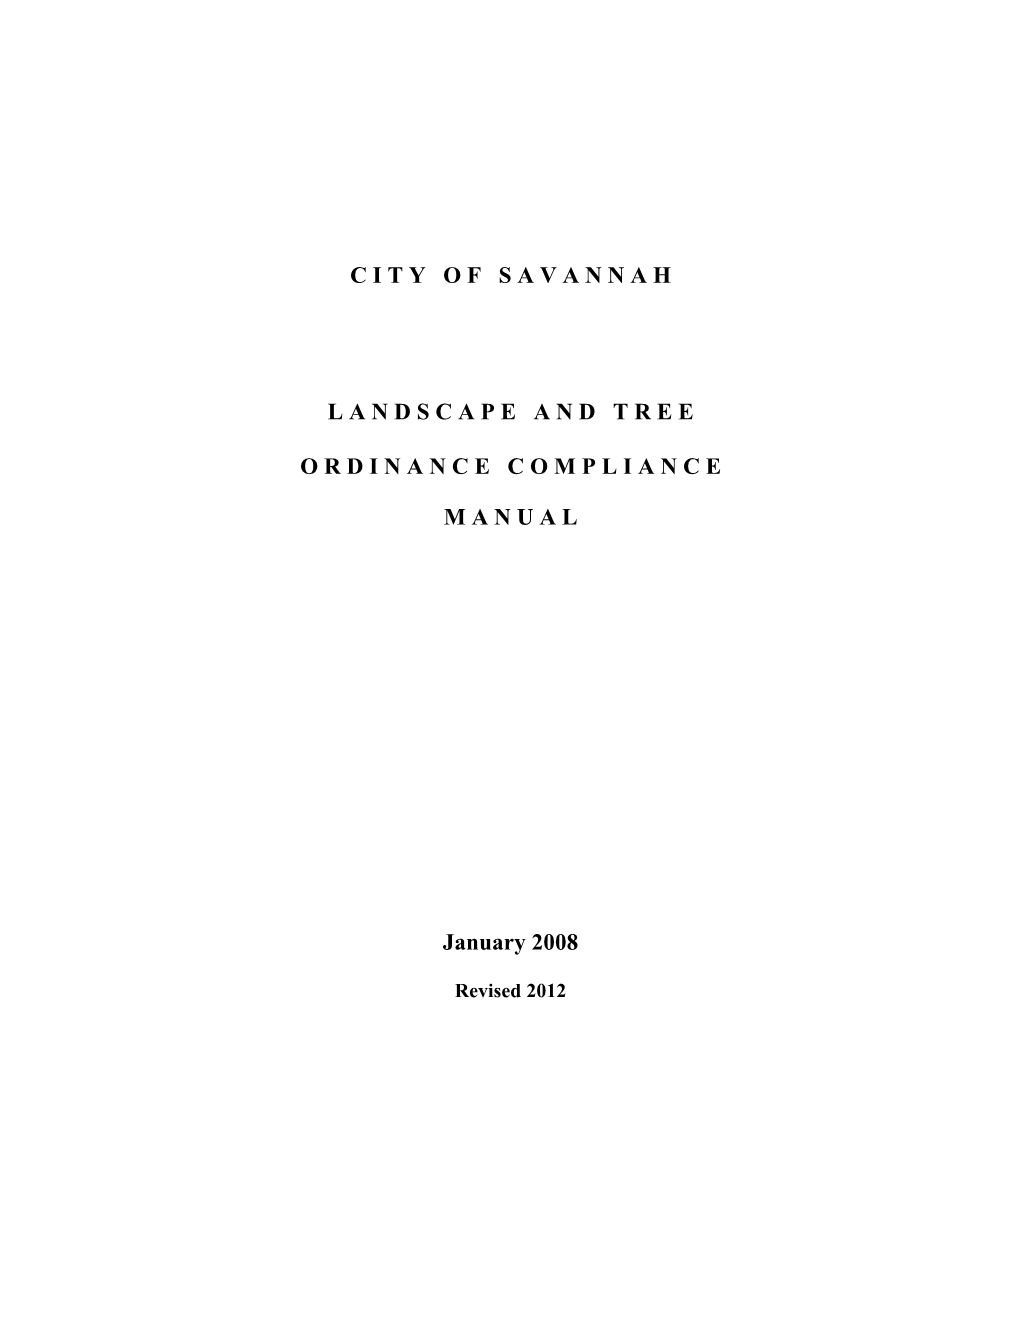 Landscape and Tree Ordinance Compliance Manual of the City of Savannah